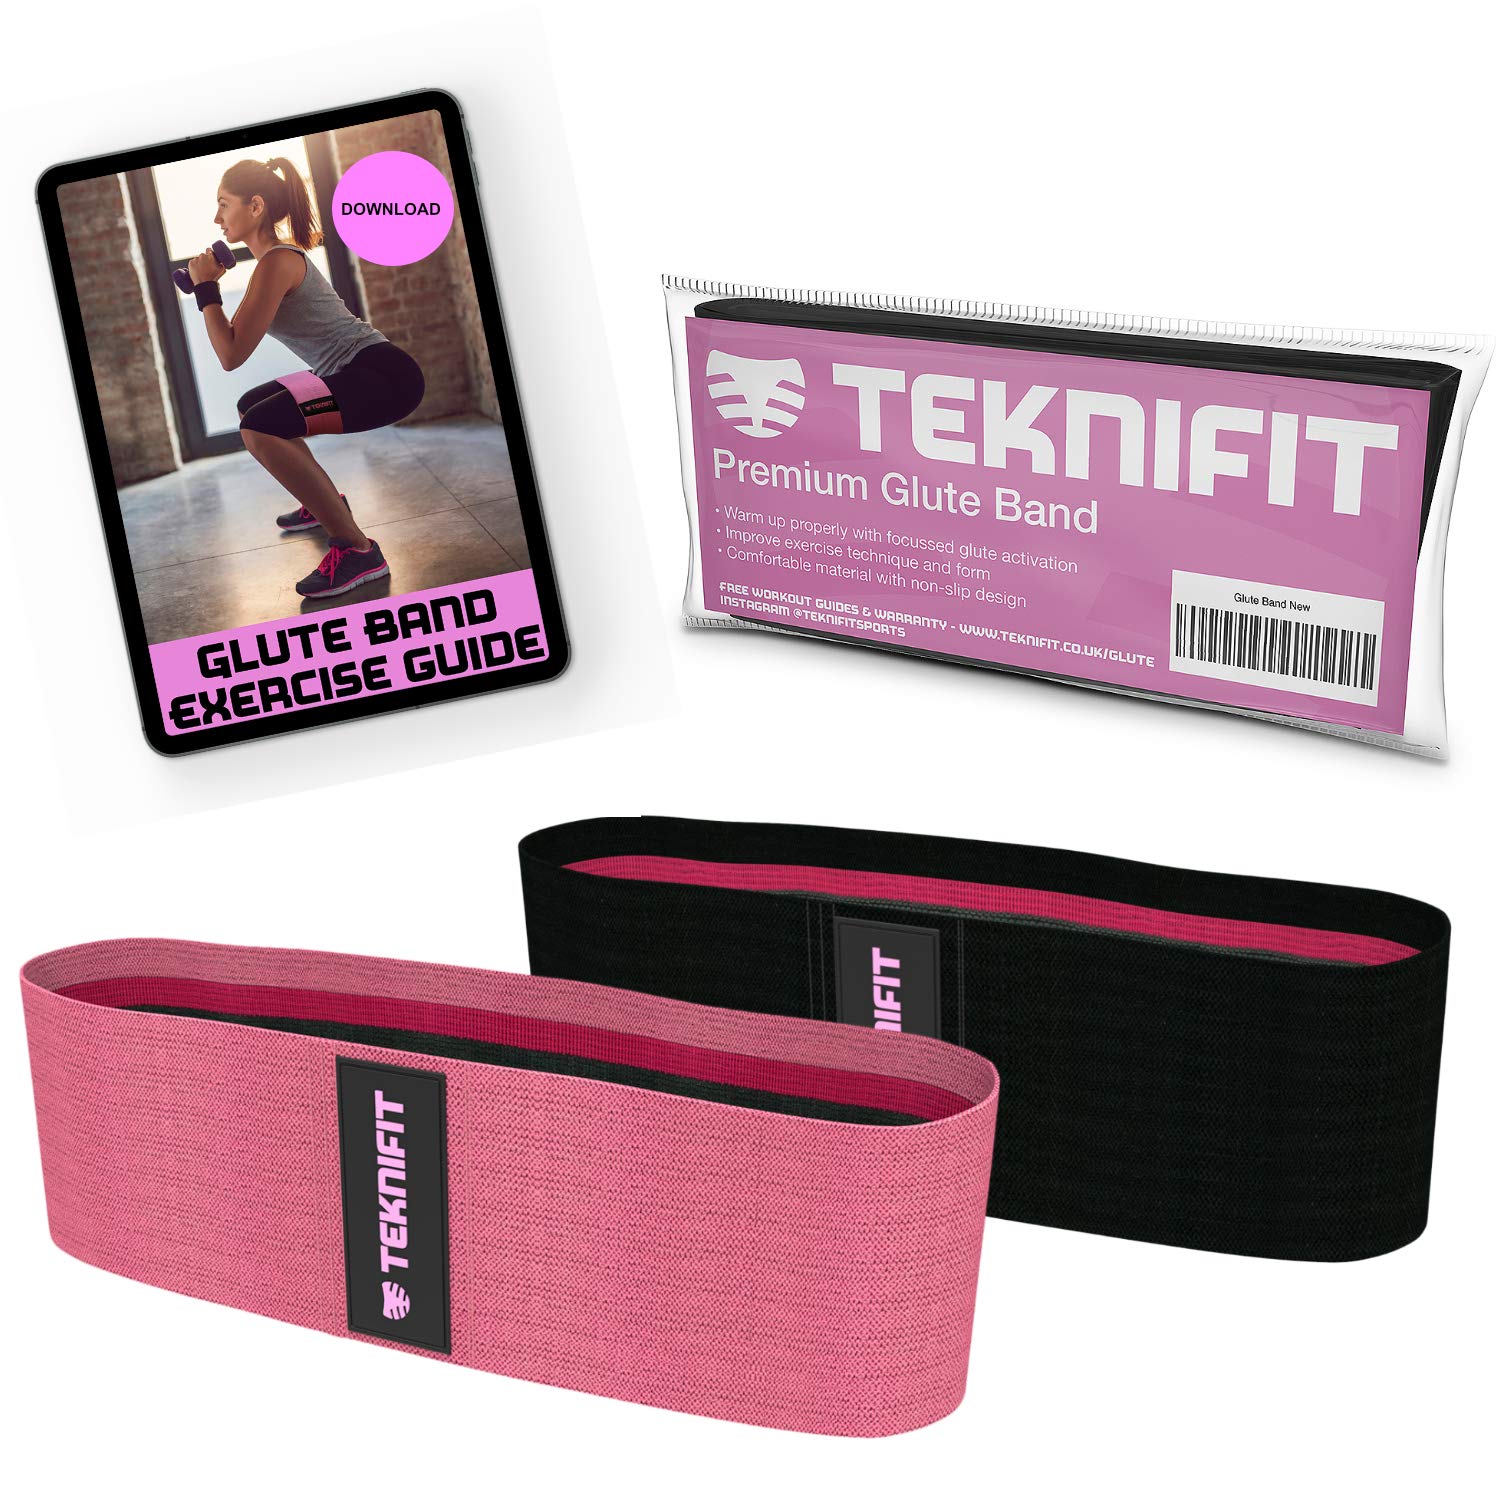 Teknifit Glute Band - Premium Fabric Resistance Band - Non Slip Design for Women - Pink OR Black Booty Band - Inc. Free Workout E-Book (DOWNLOAD) with Butt and Leg Toning Exercise Guide